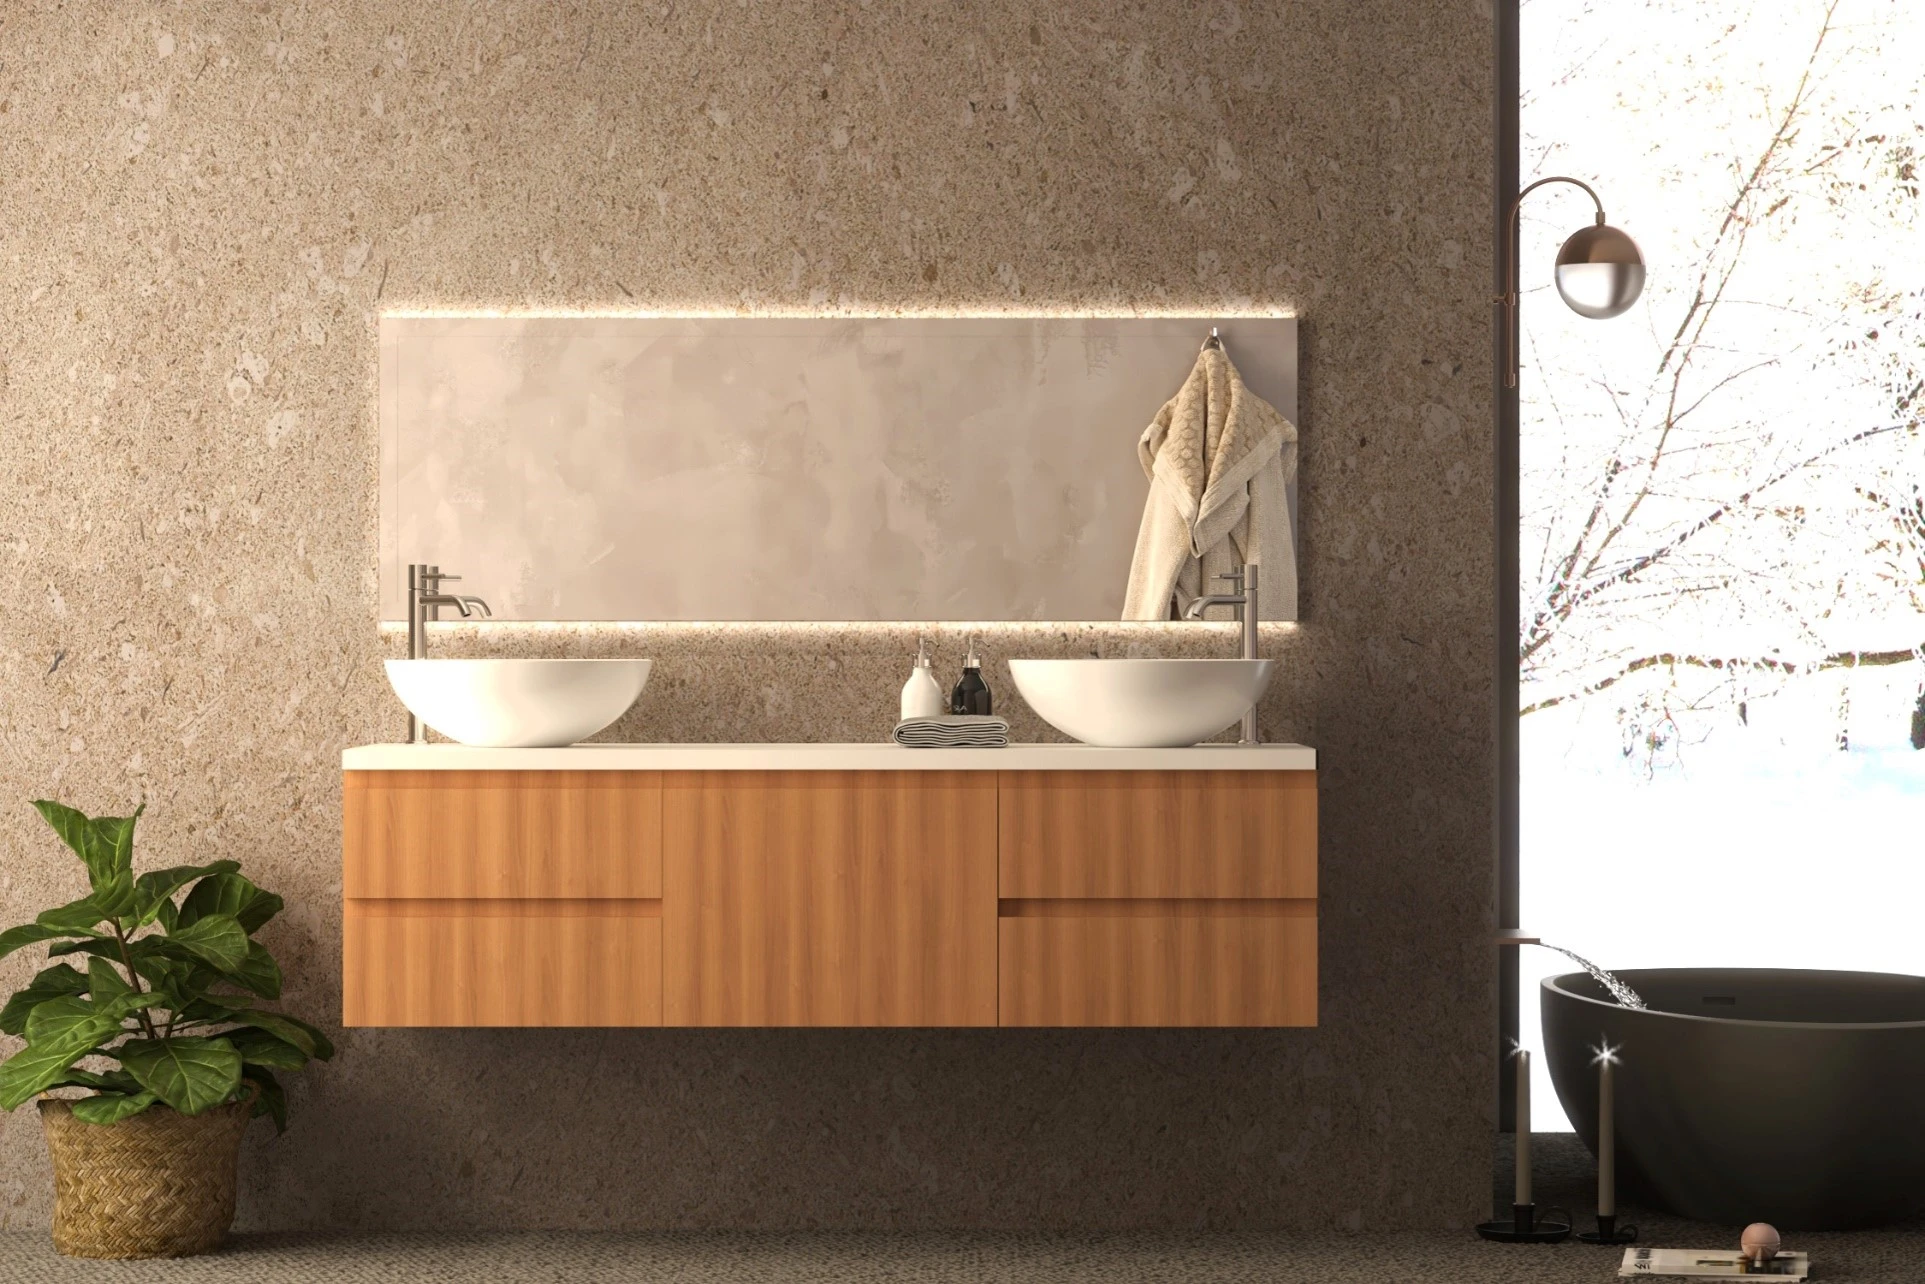 A bathroom with two sinks and a mirror incorporating contemporary design elements.